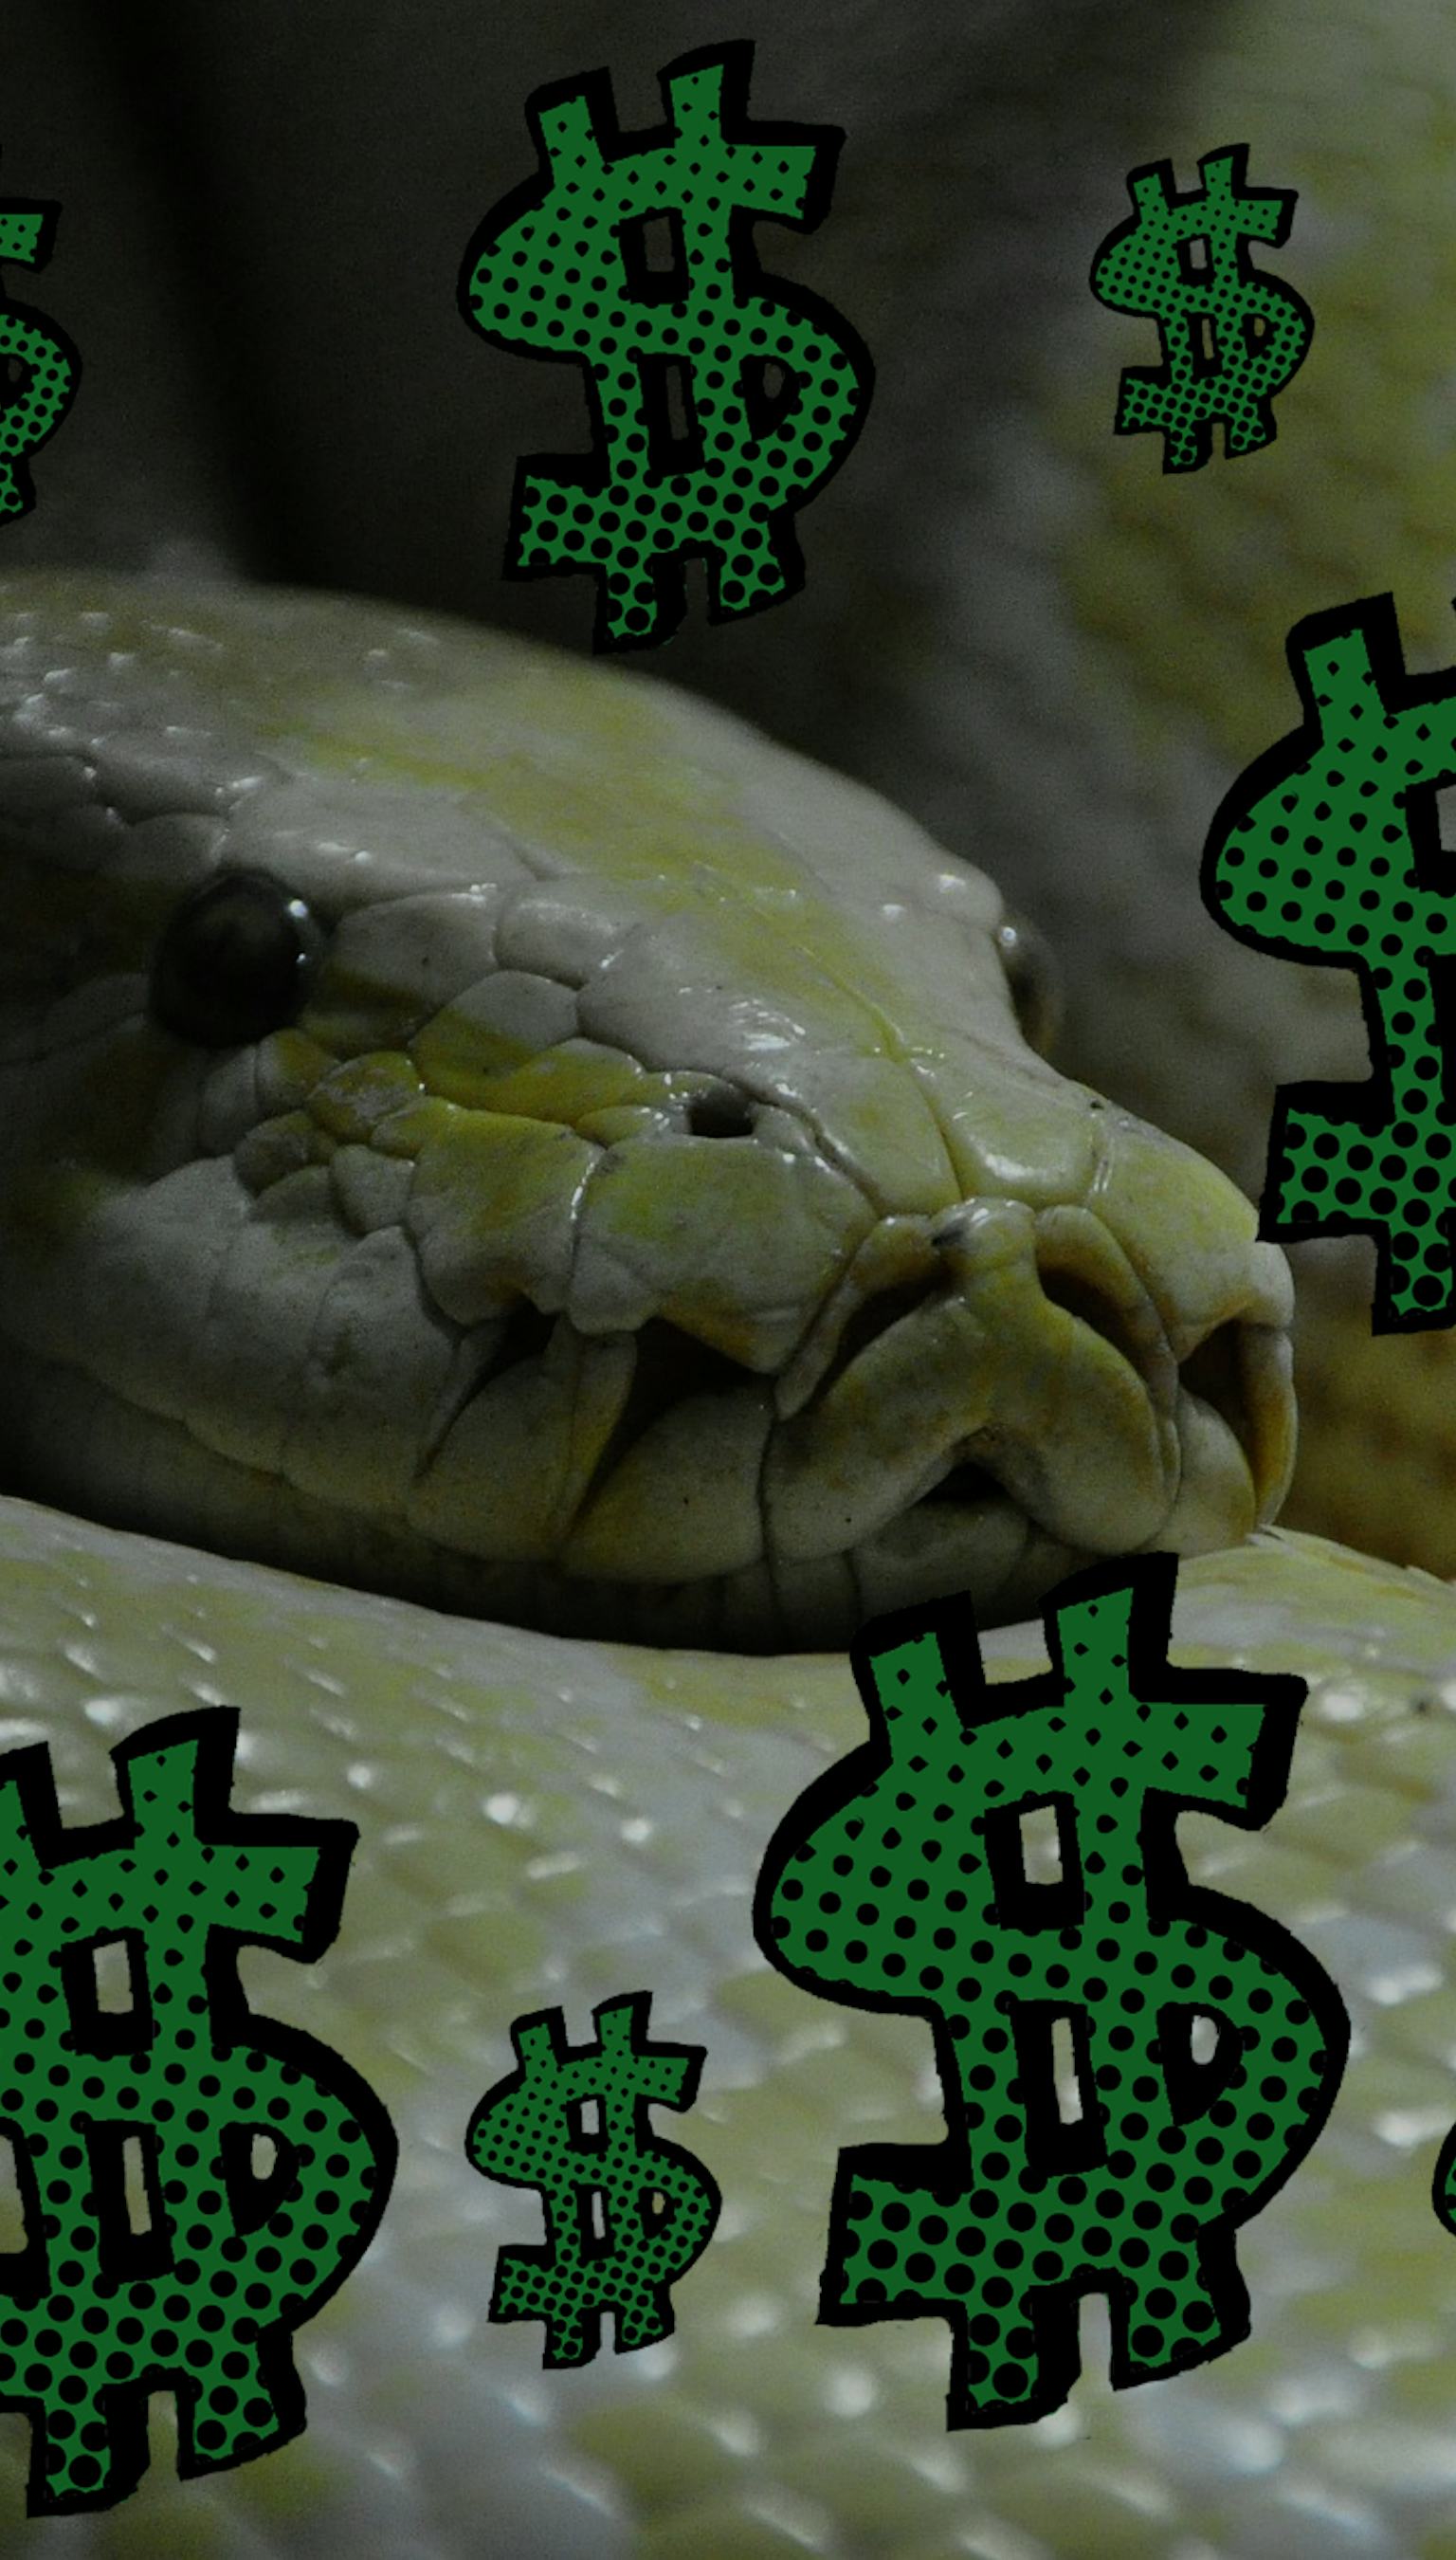 Want to Make Money? Learn Python and Become a Data Scientist